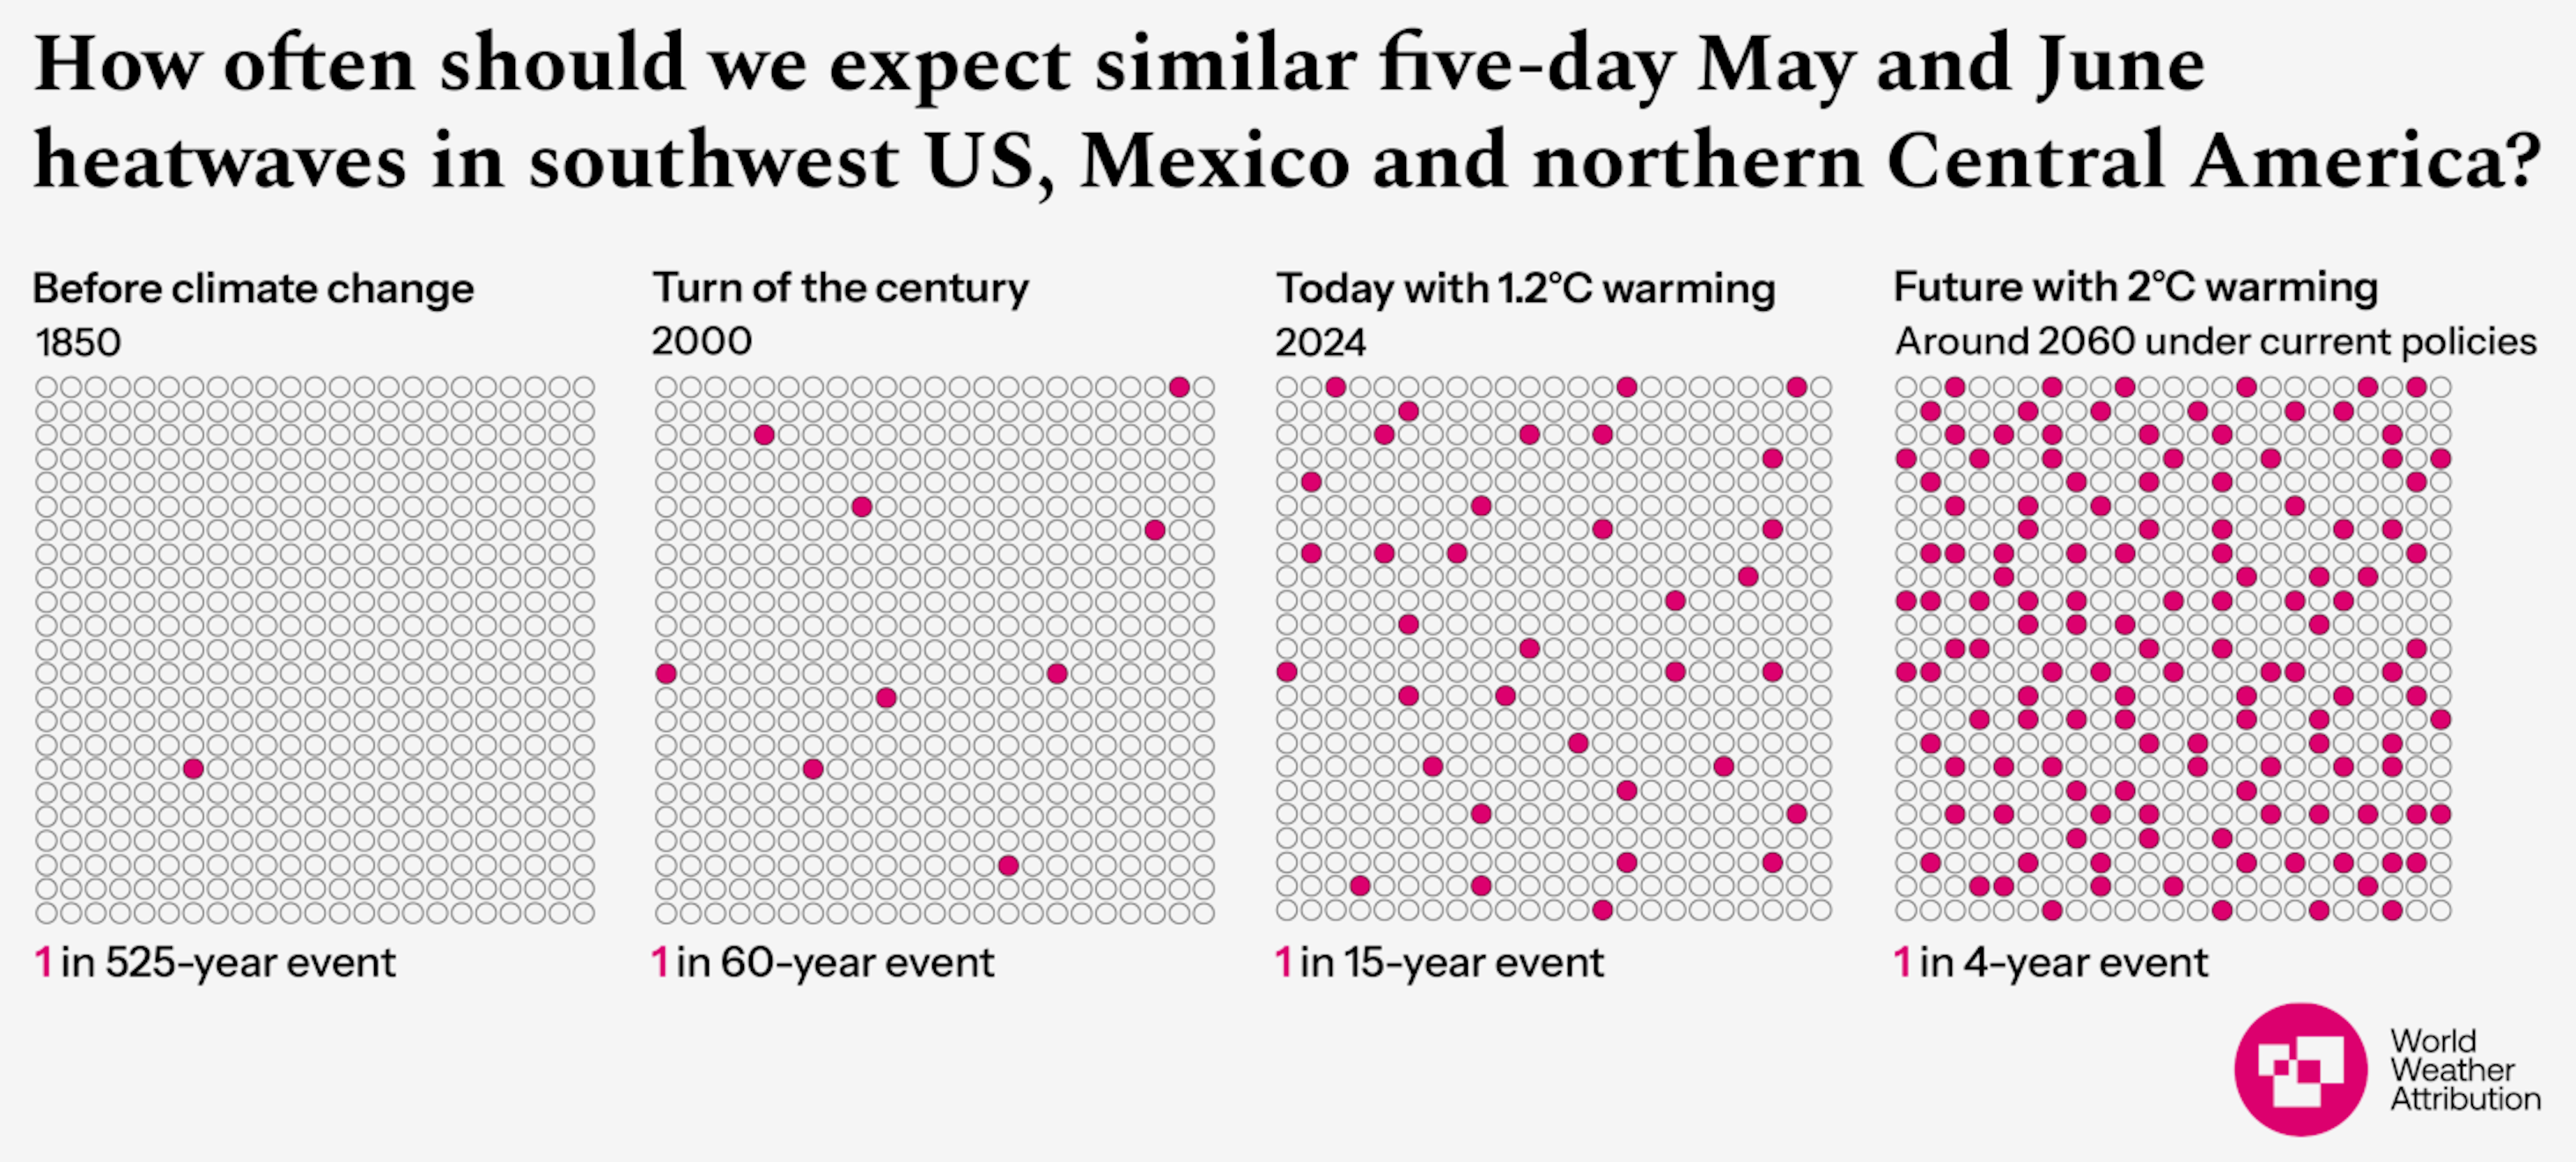 Likelihood of five-day May-June heatwaves similar to 2024 in the Southwest U.S., Mexico, and northern Central America, under 1.2°C and 2°C of warming. With 2°C of warming, the chance of similar deadly heatwaves increases from a 1 in 60-year event as in the year 2000 to a 1 in 4-year event. Graphic: World Weather Attribution